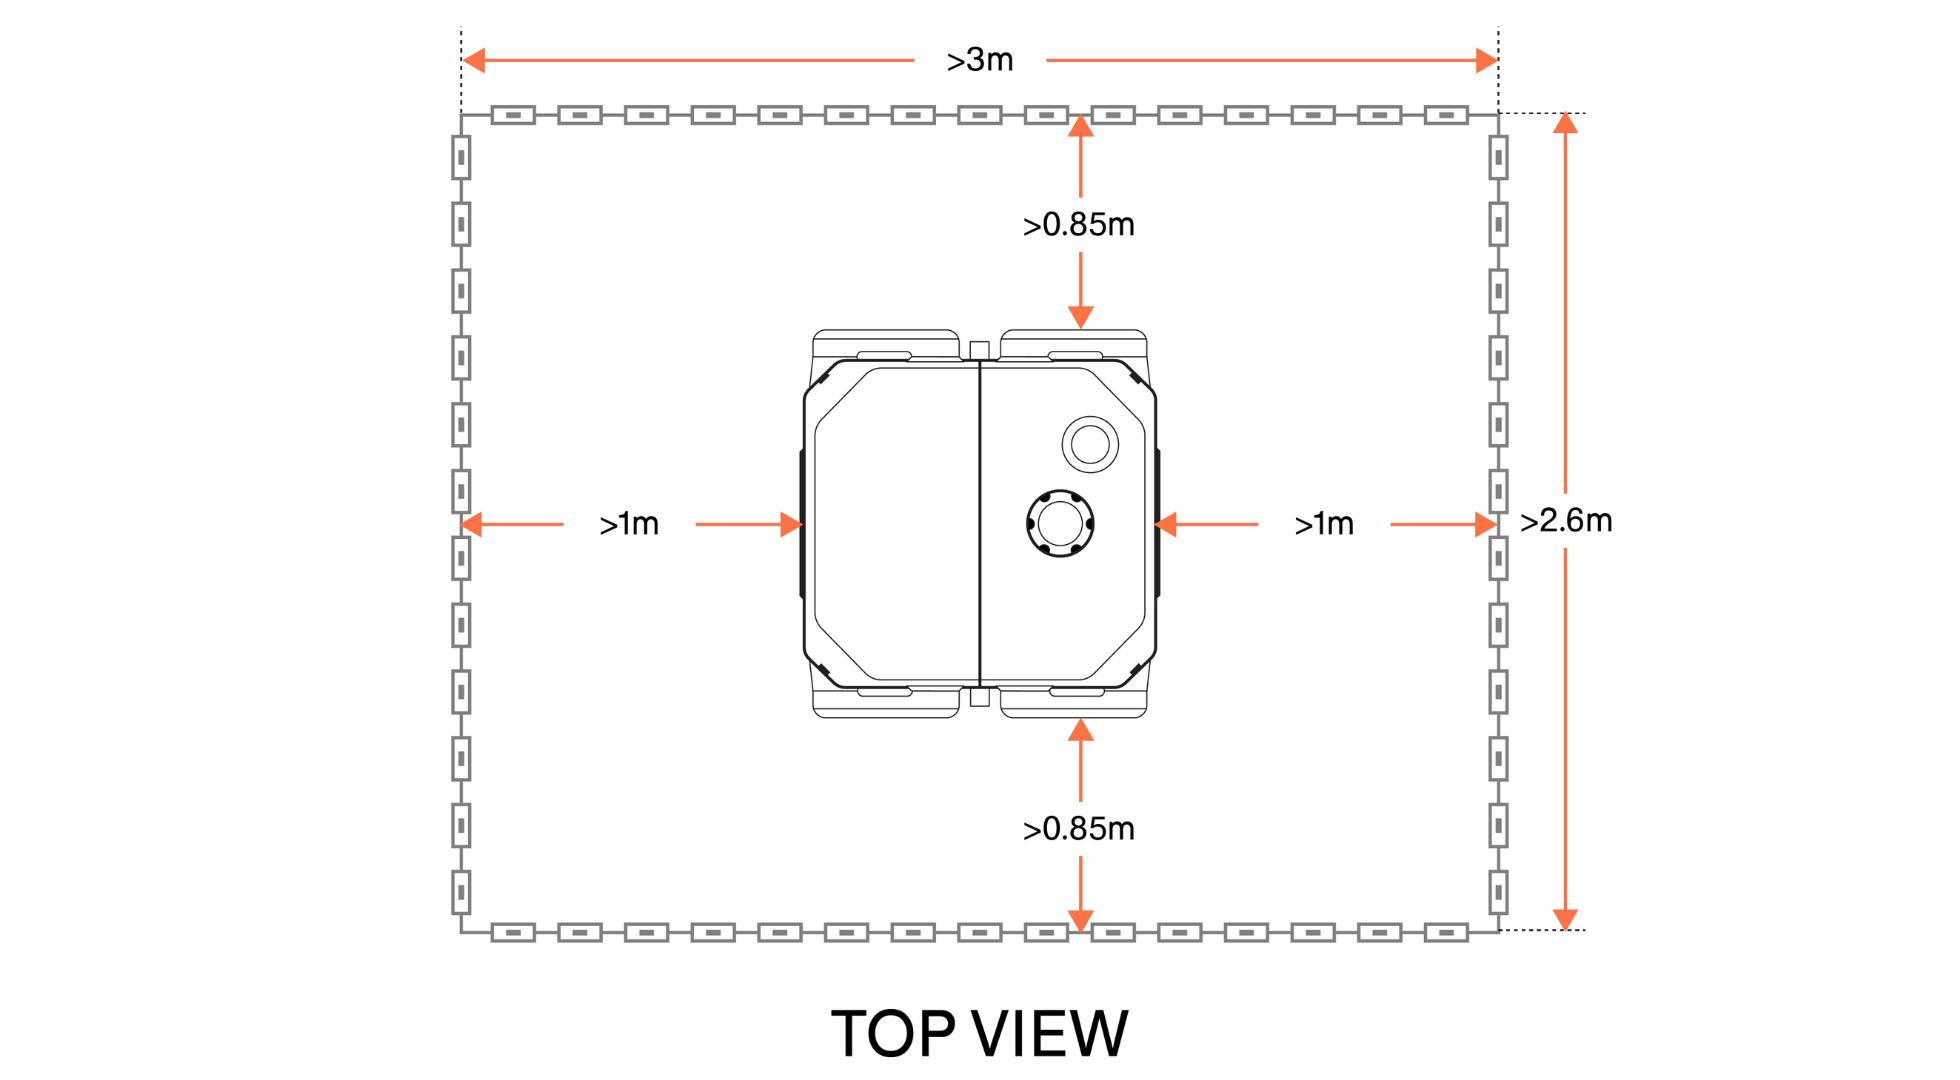 Space required to install DJI Dock.